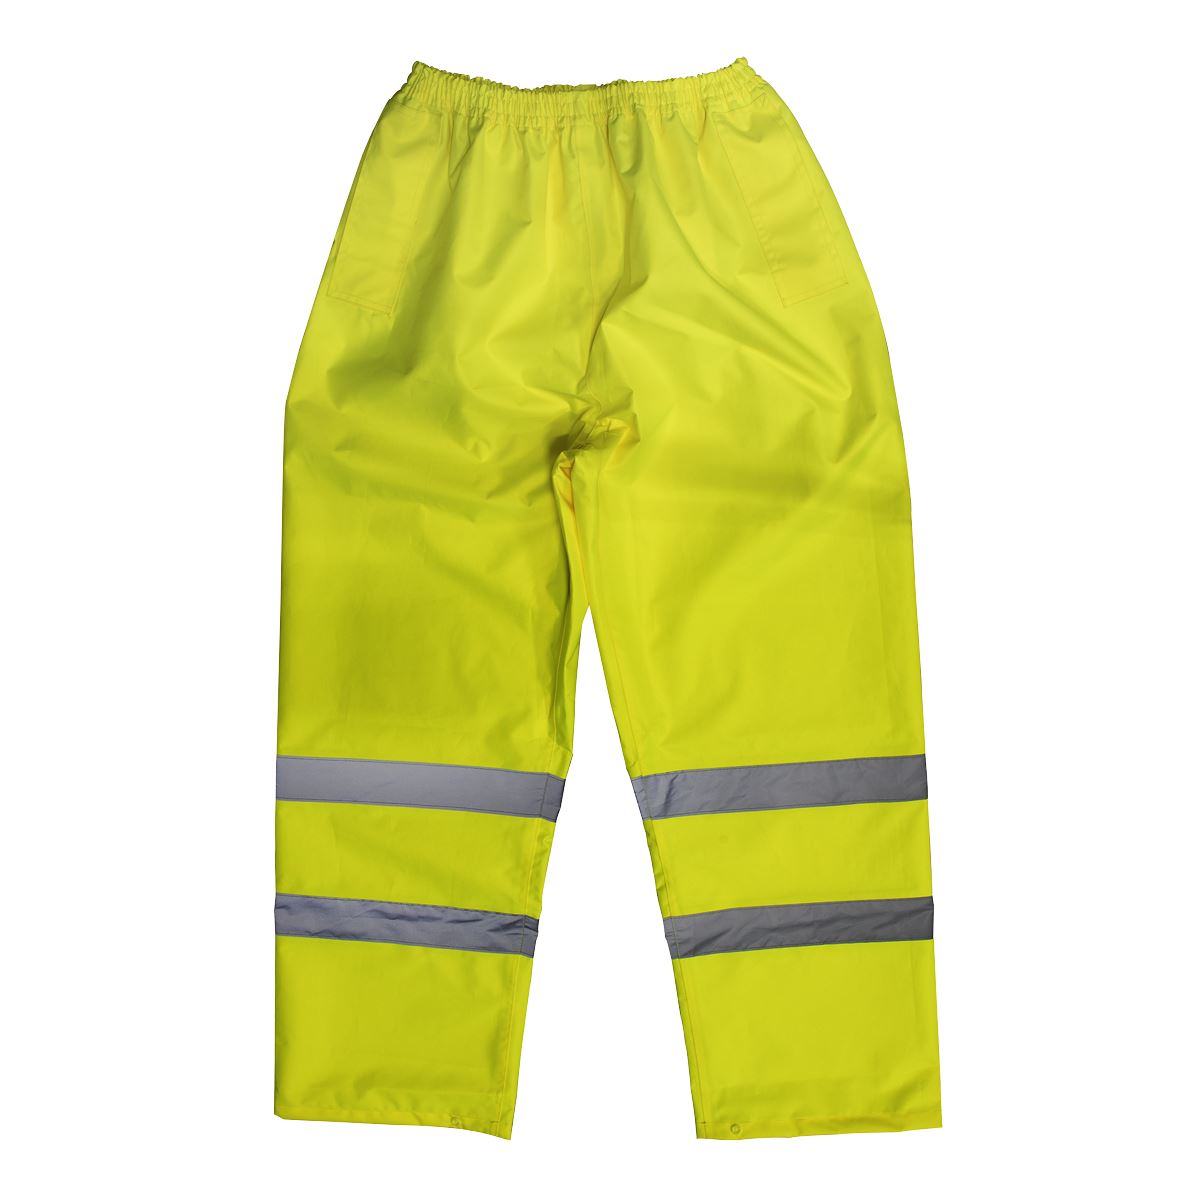 Worksafe by Sealey Hi-Vis Yellow Waterproof Trousers - XX-Large